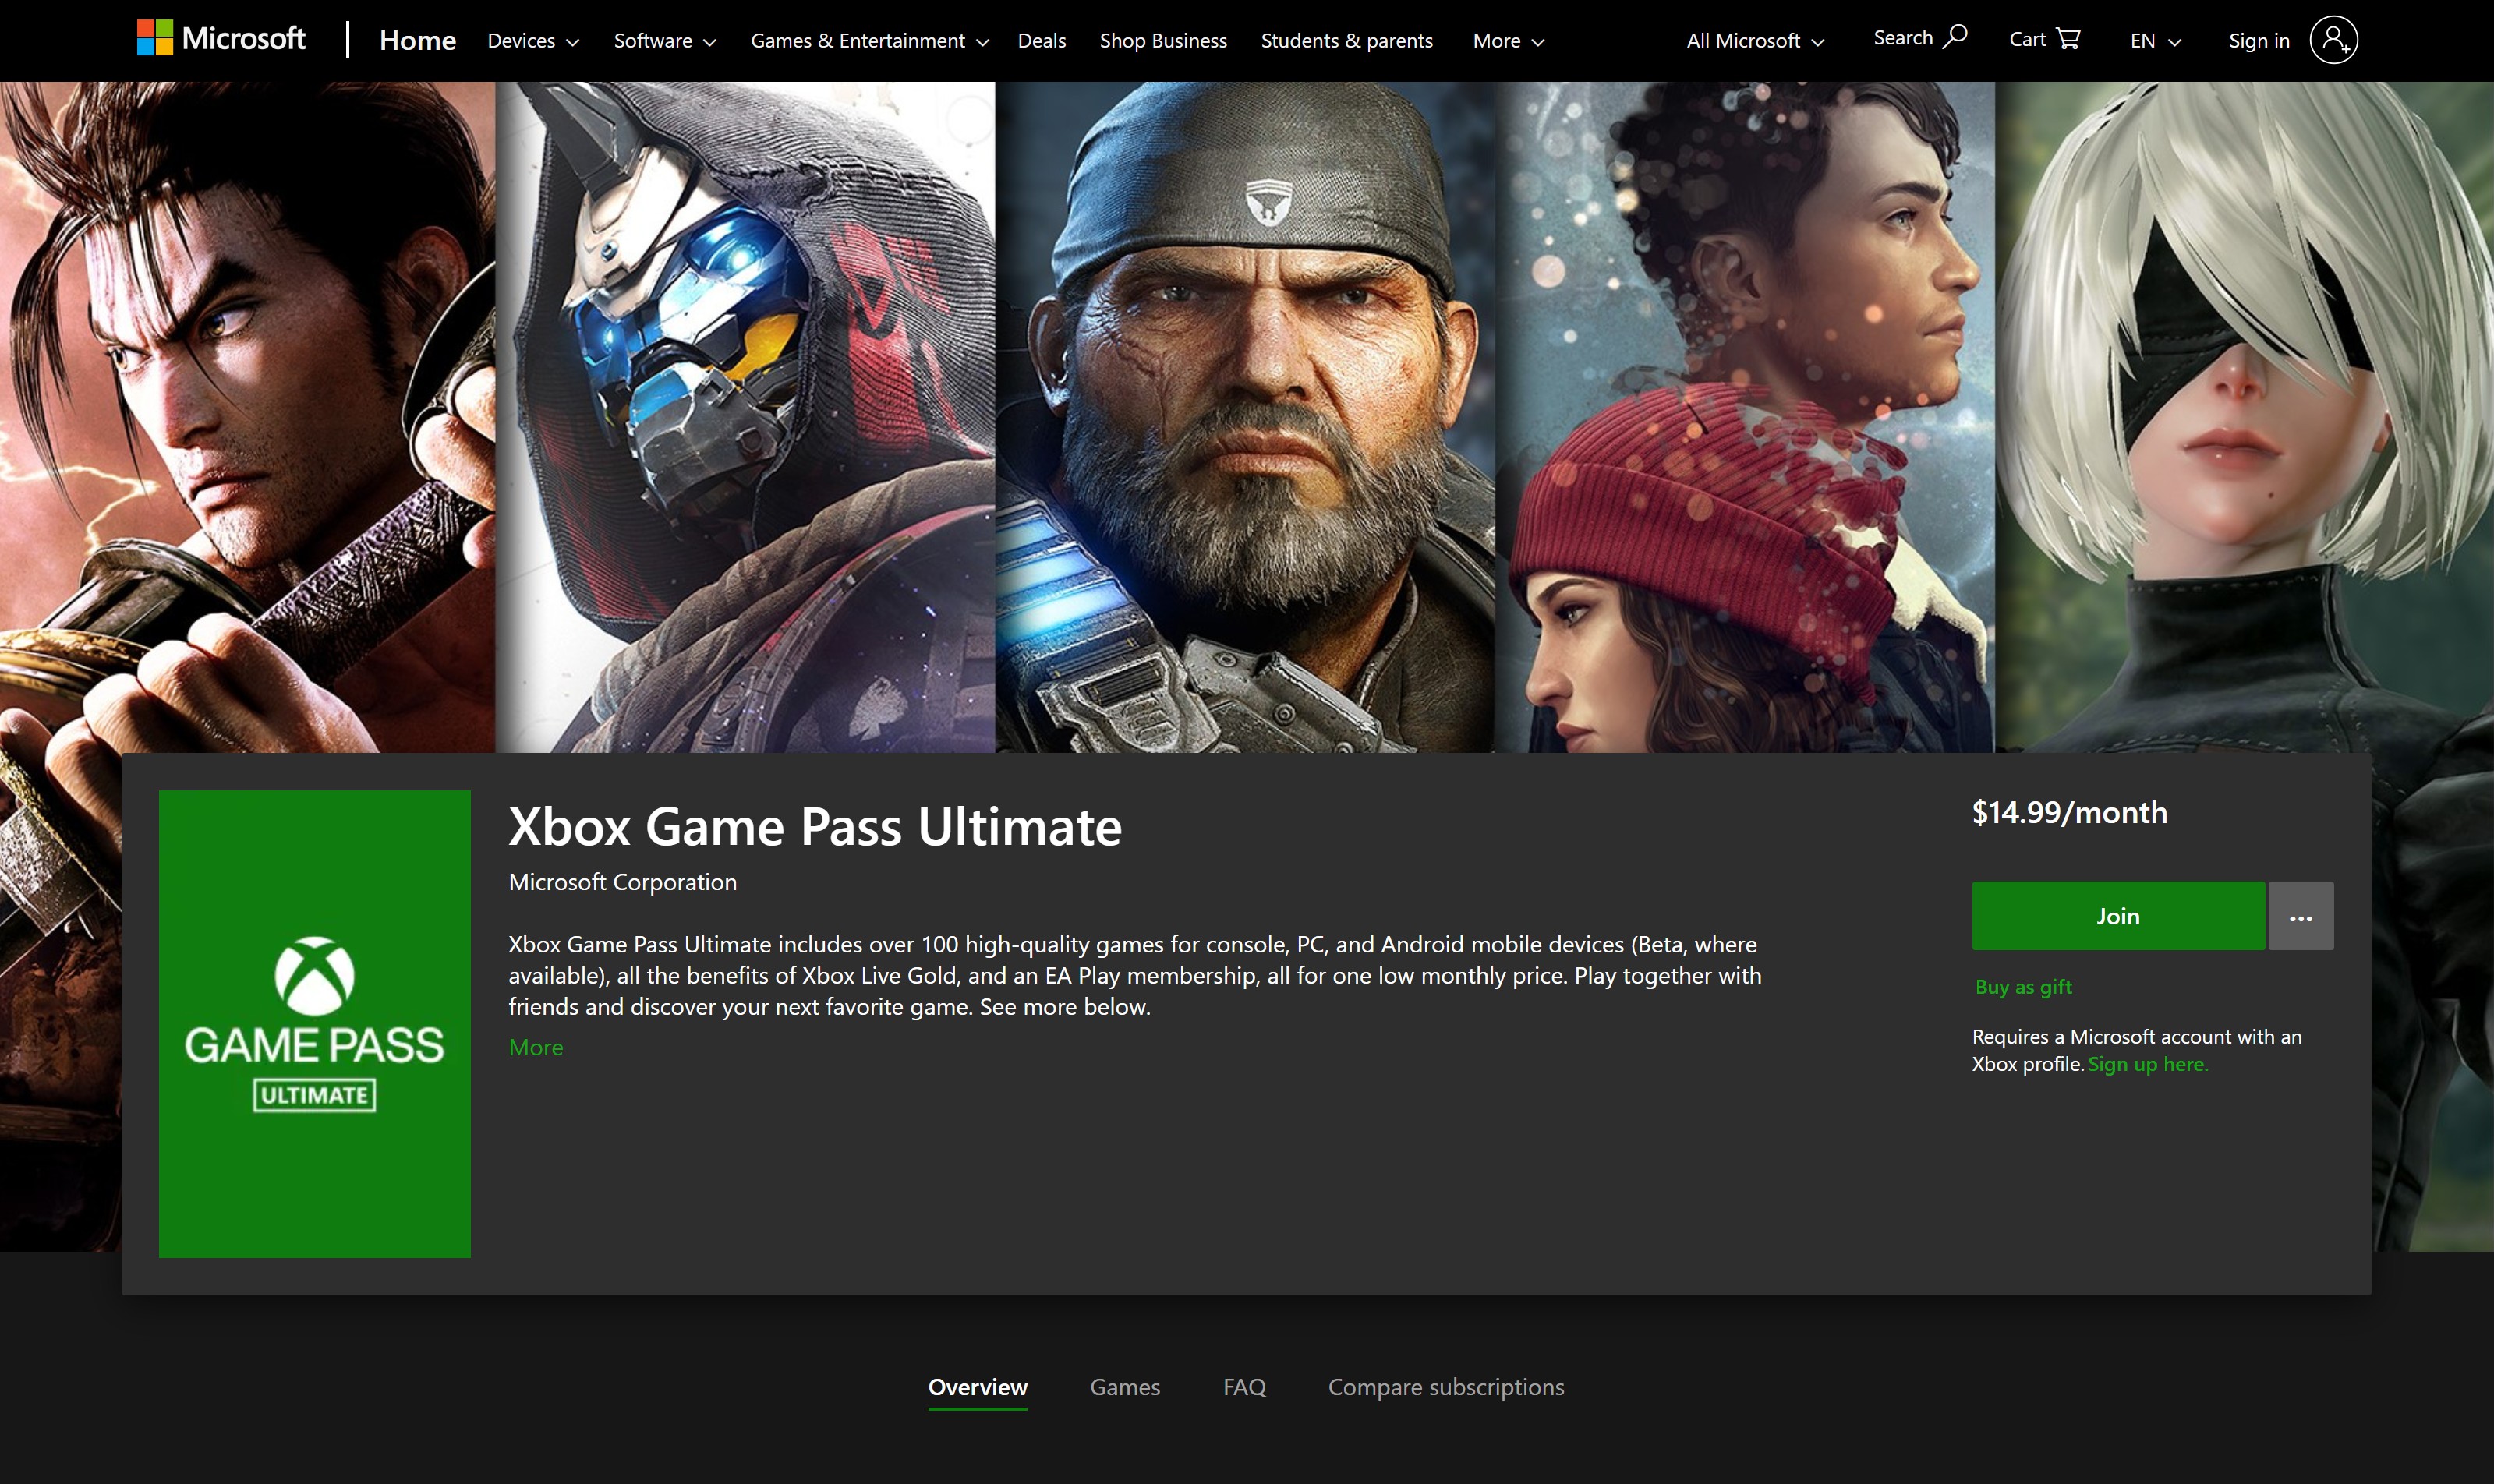 Xbox Game Pass: The ultimate gaming gift